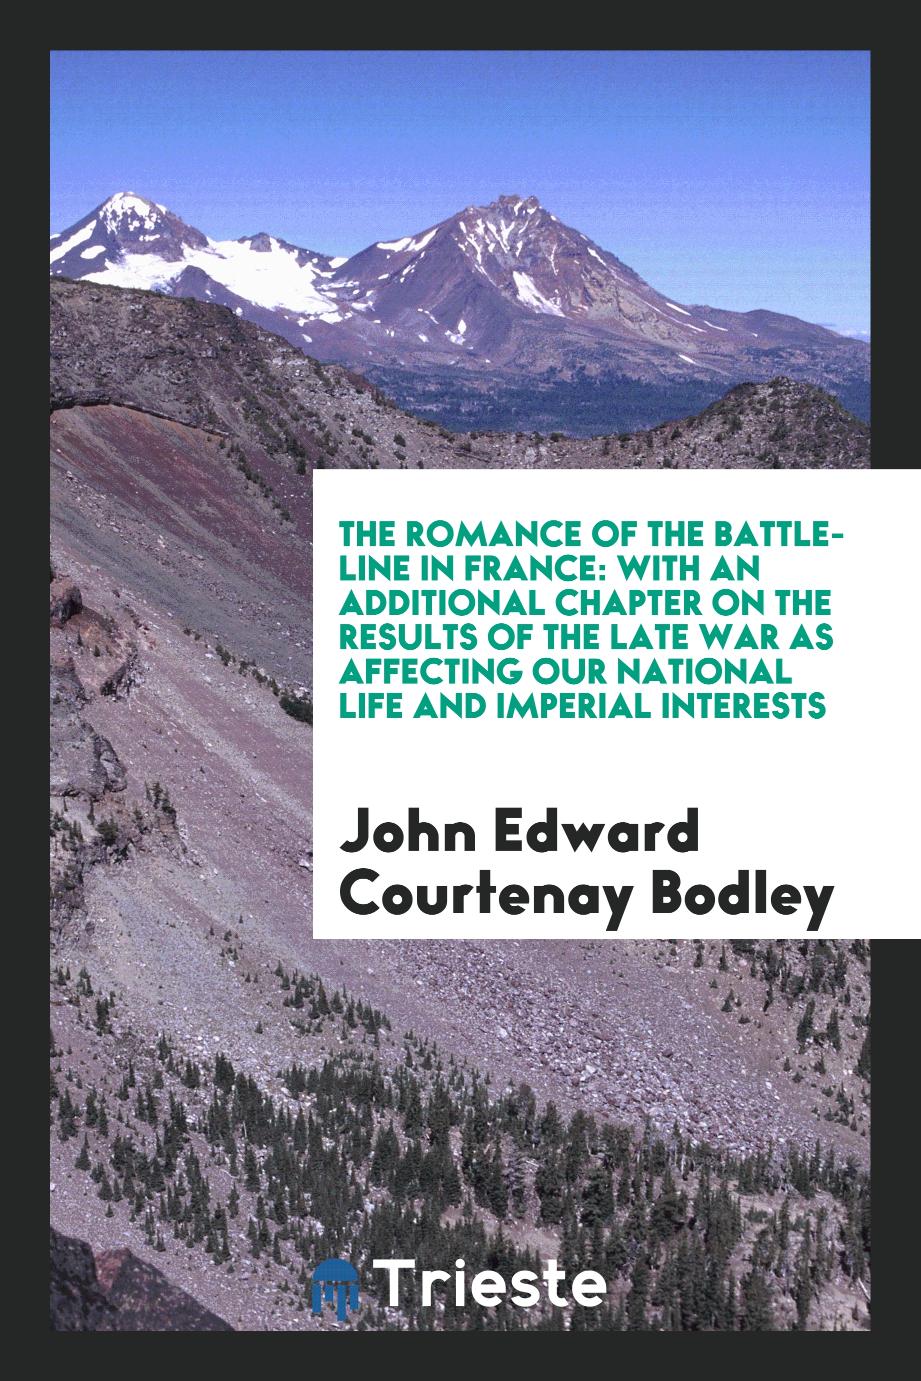 The romance of the battle-line in France: with an additional chapter on the results of the late war as affecting our national life and imperial interests